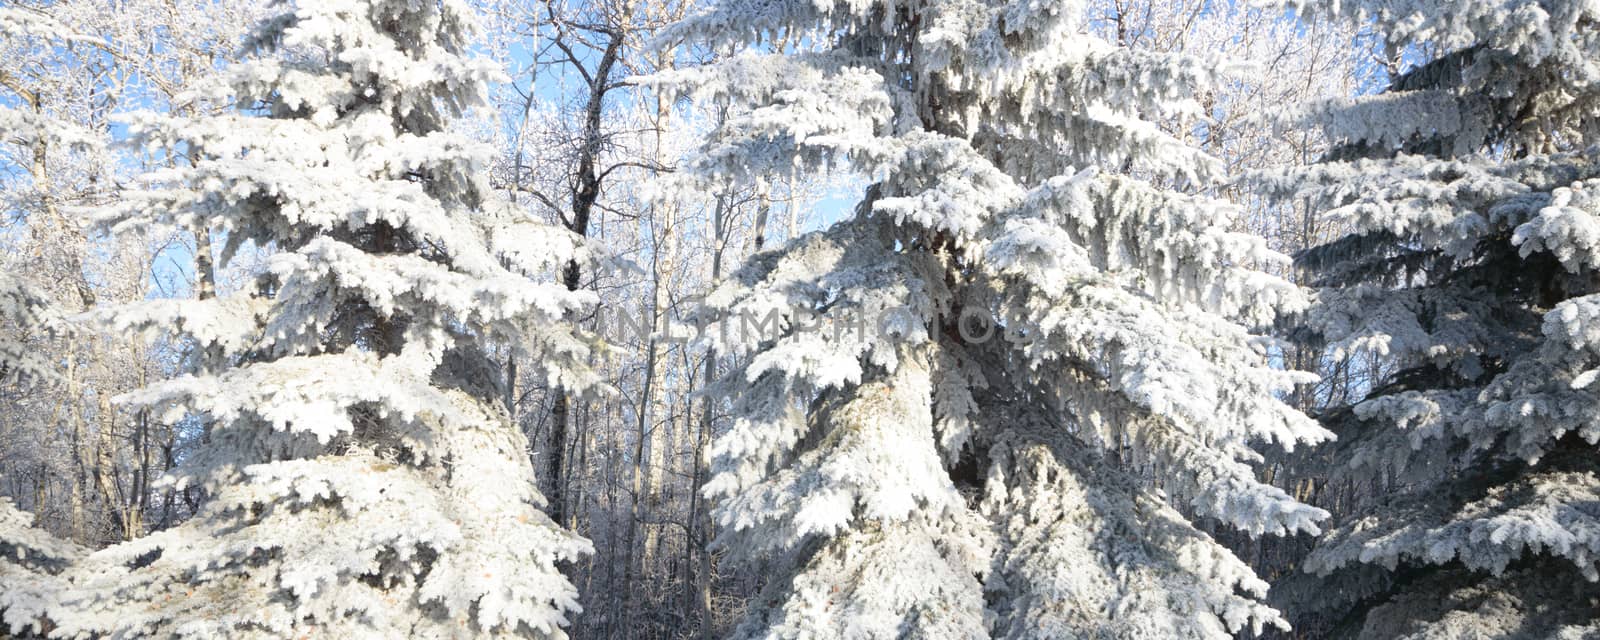 Sunlight in the frozen forest, nature series